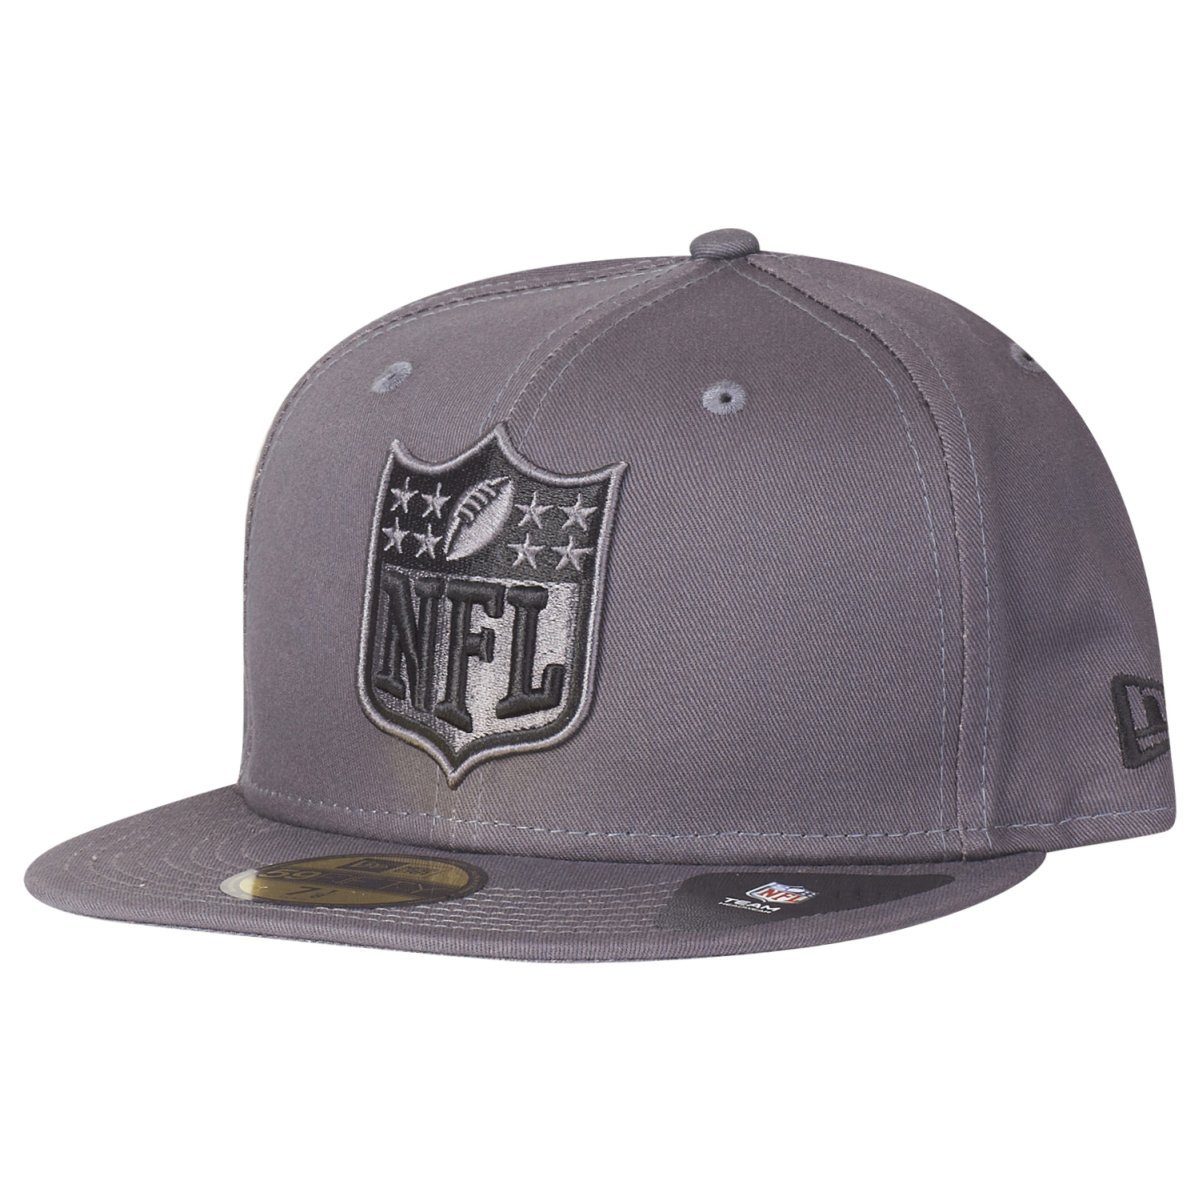 New 59Fifty Era Logo NFL Cap Fitted